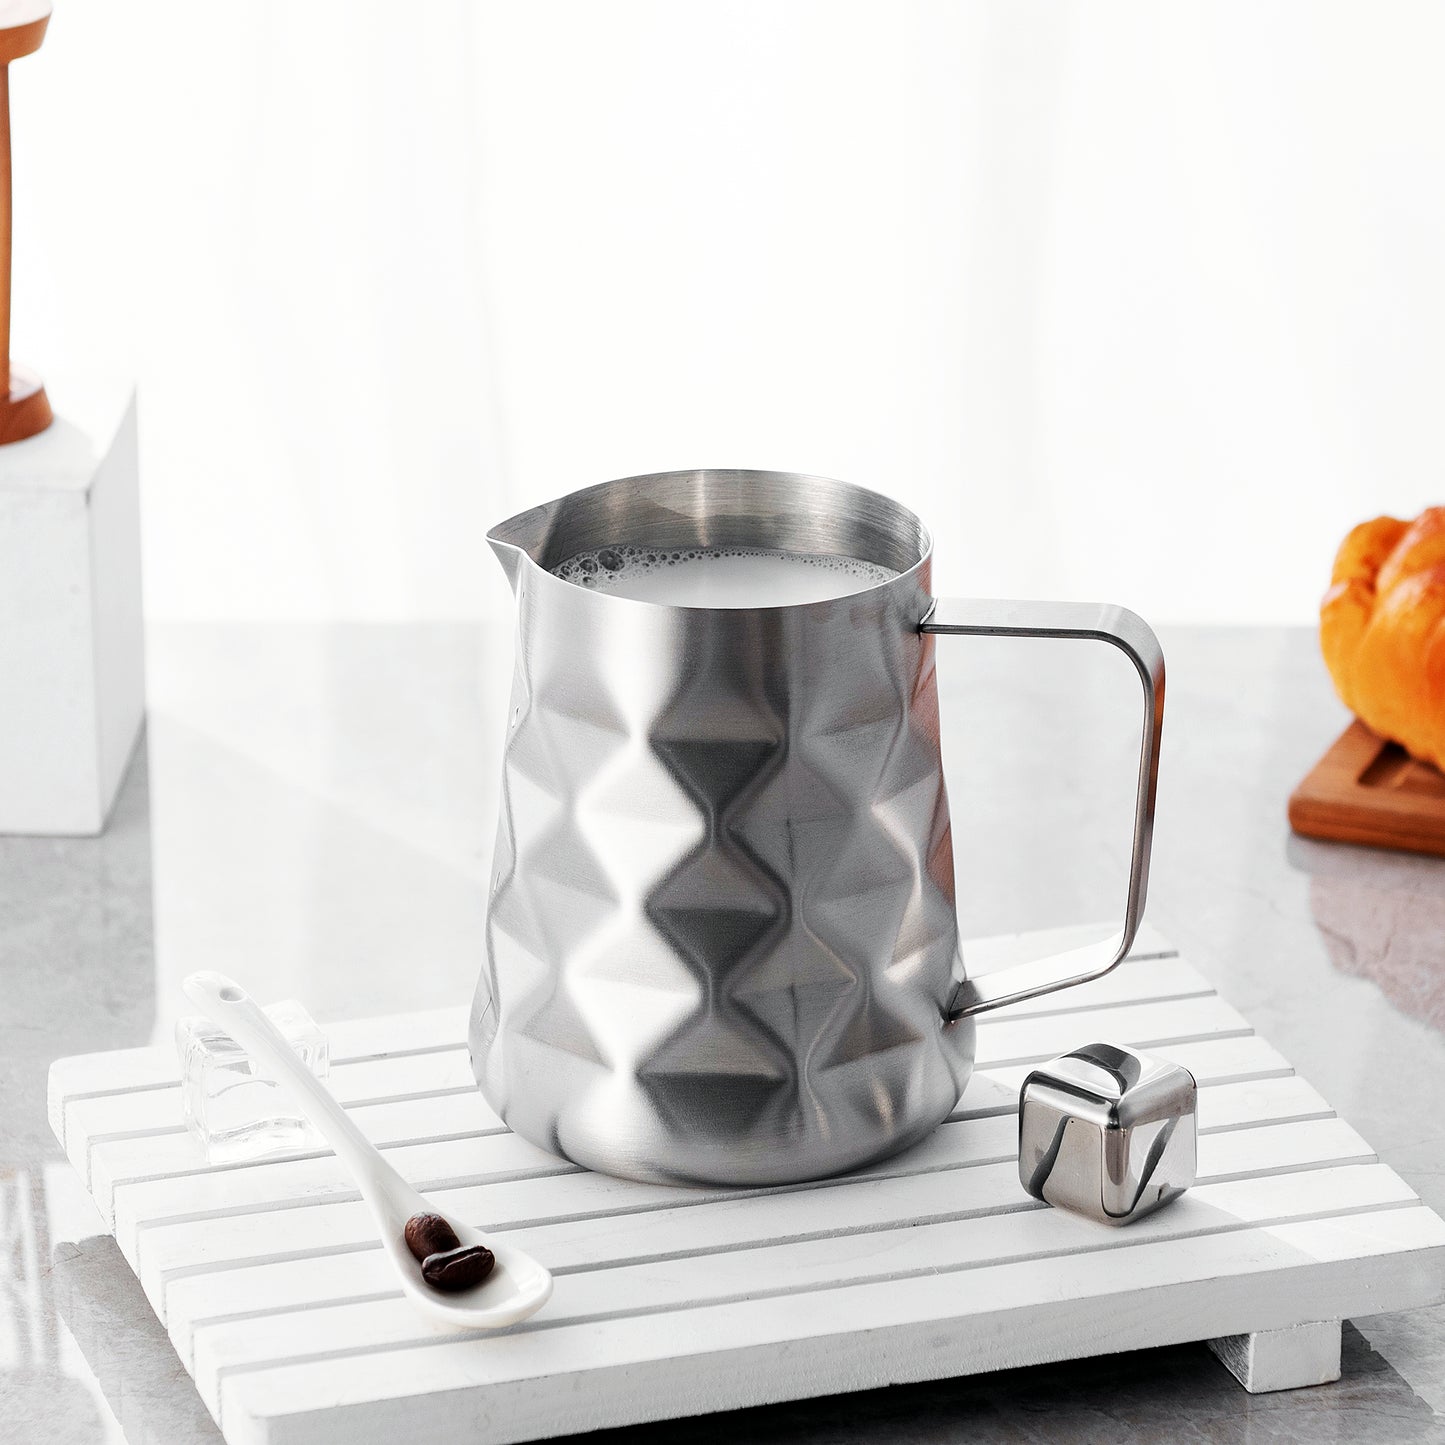 Avant Garde Stainless Steel Frothing Pitcher With Modernist Metal Ice Cube